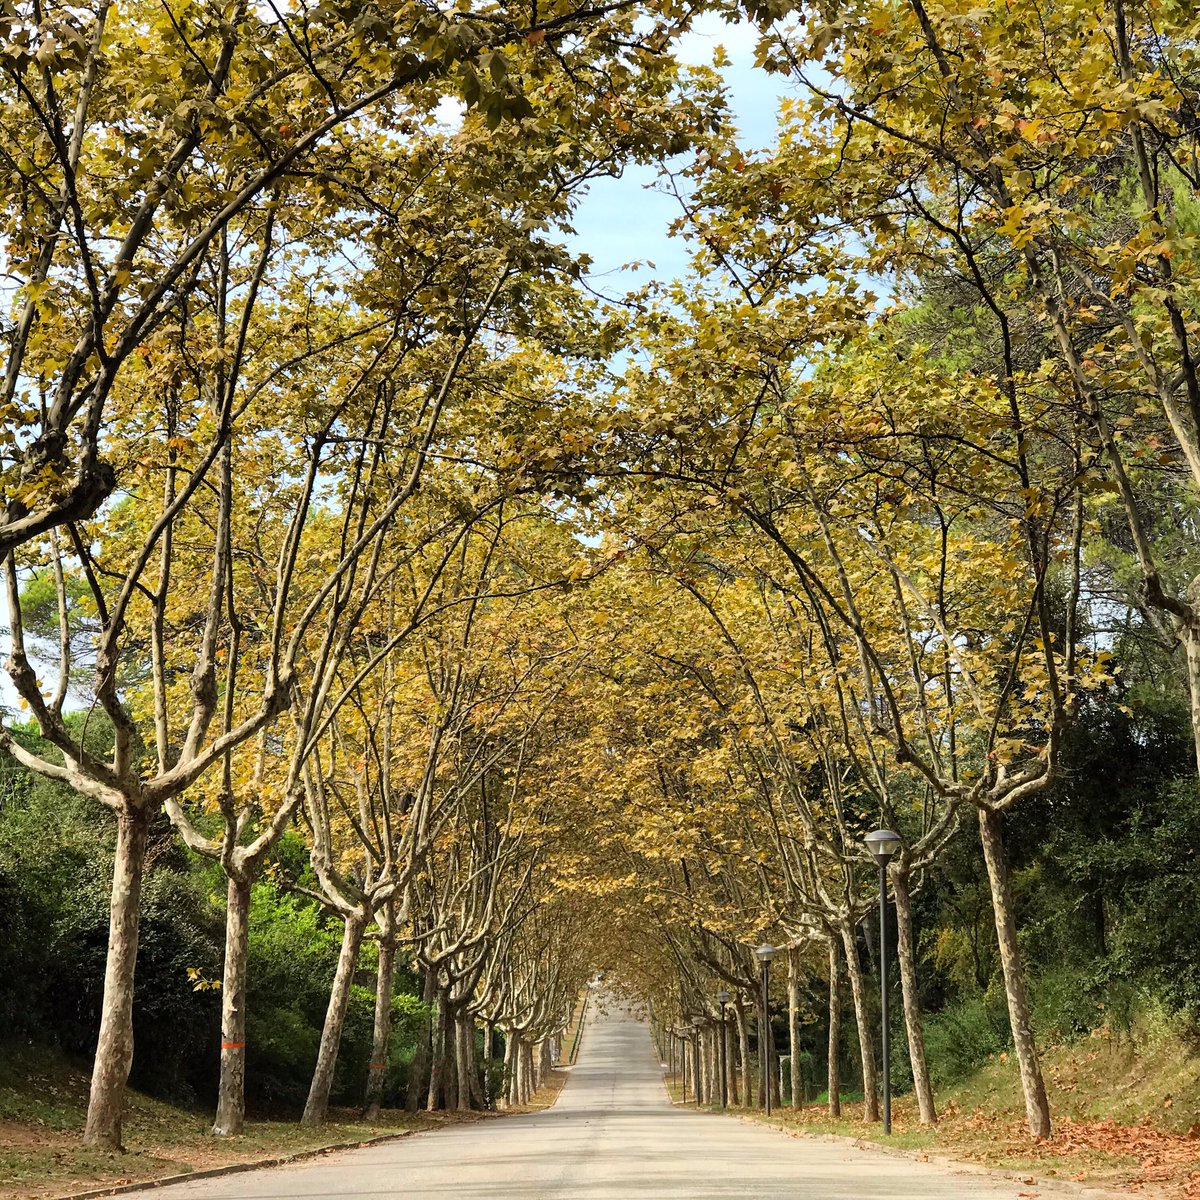 Watch my last YouTube video youtu.be/2uTJpWAg0qU and subscribe to my YouTube channel to support me🤗🤗 #autumn #road #forest #leaves #leaf #trees #nice #beautiful #picoftheday #infinite #infiniteroad #nature #calm #naturelovers #naturelover #nature #rural #rural_love #tree